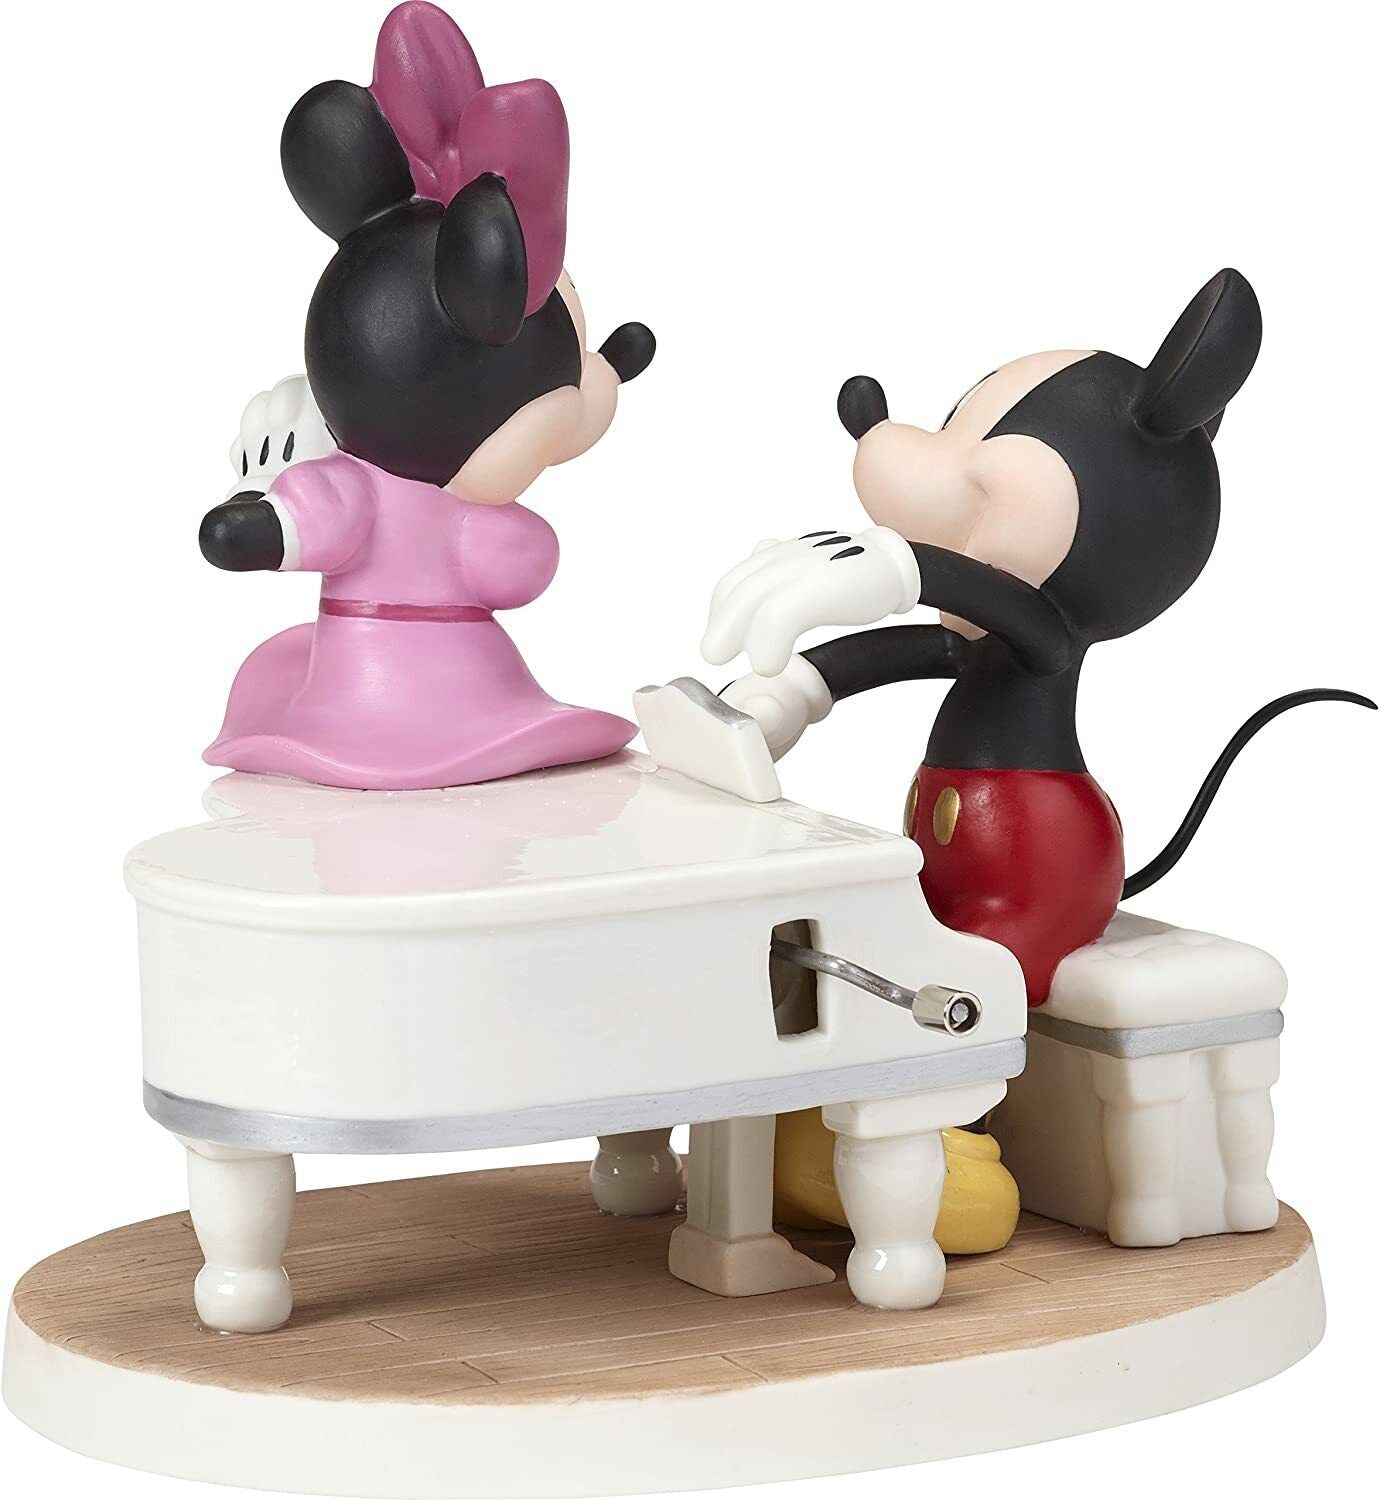 Our Love Is a Sweet Melody Disney Precious Moments Figurine